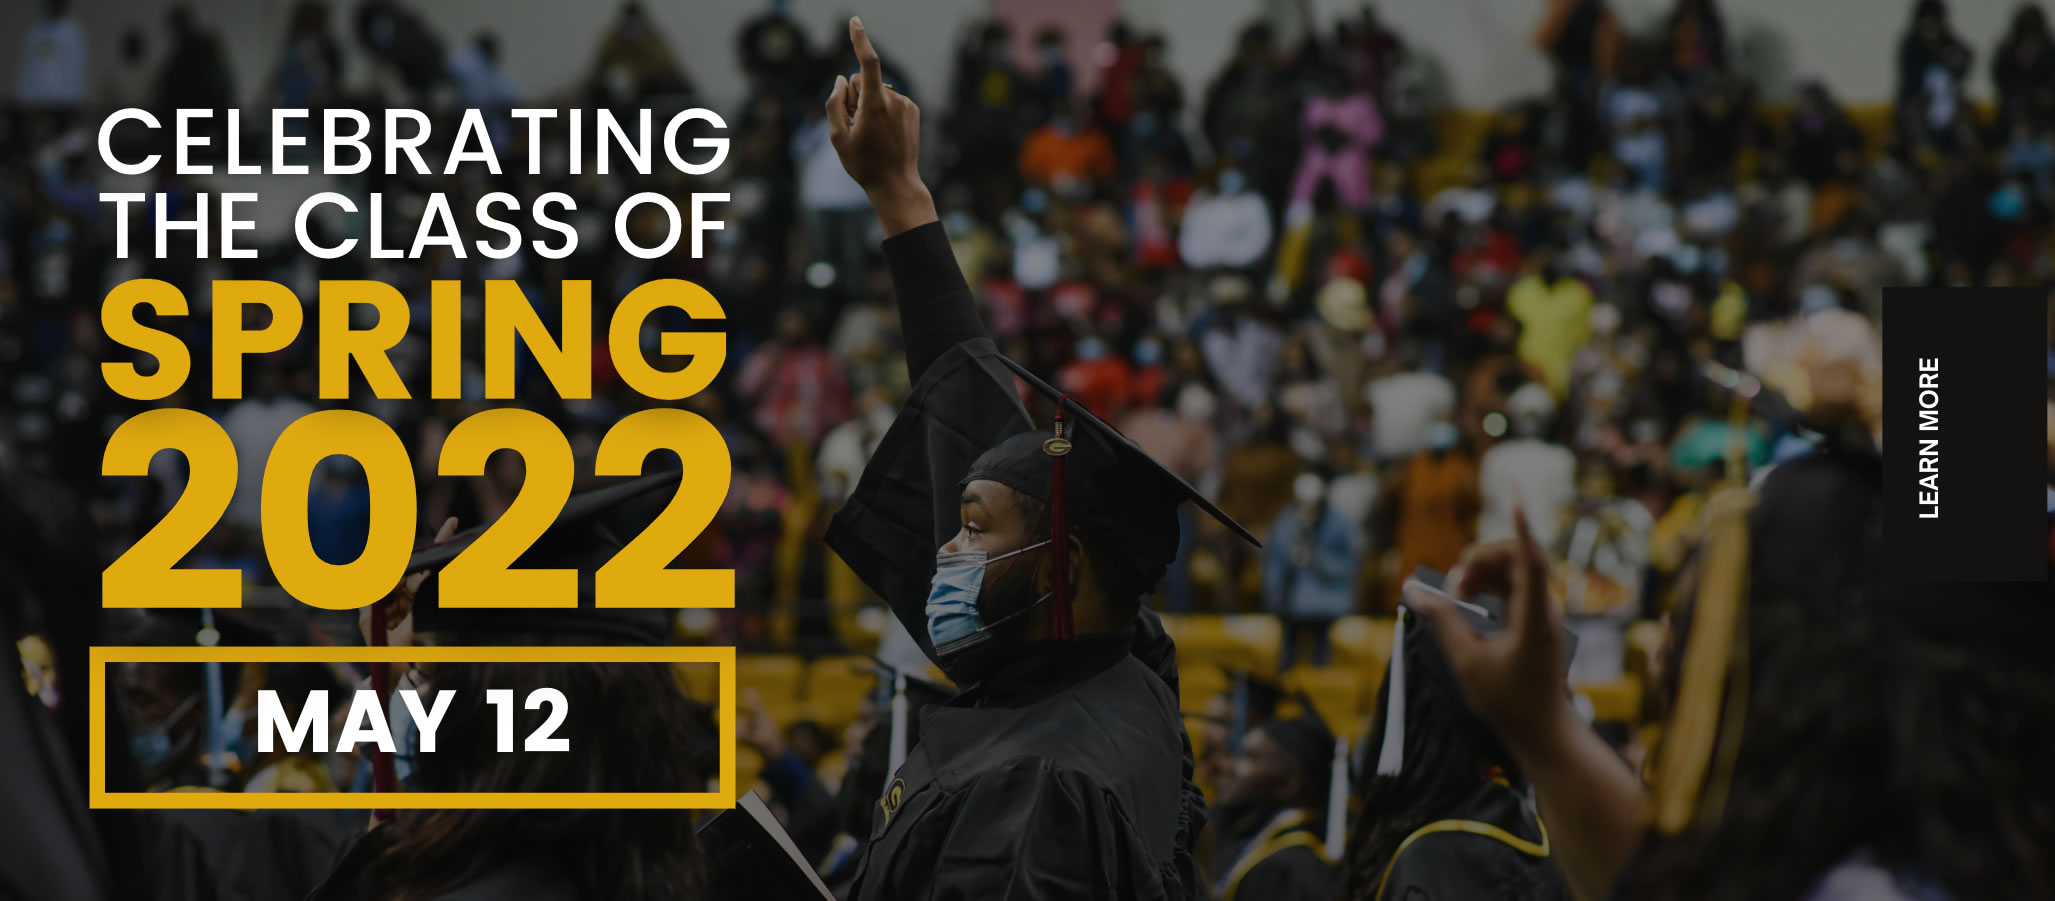 Celebrating the Class of Spring 2022 - May 12, learn more...